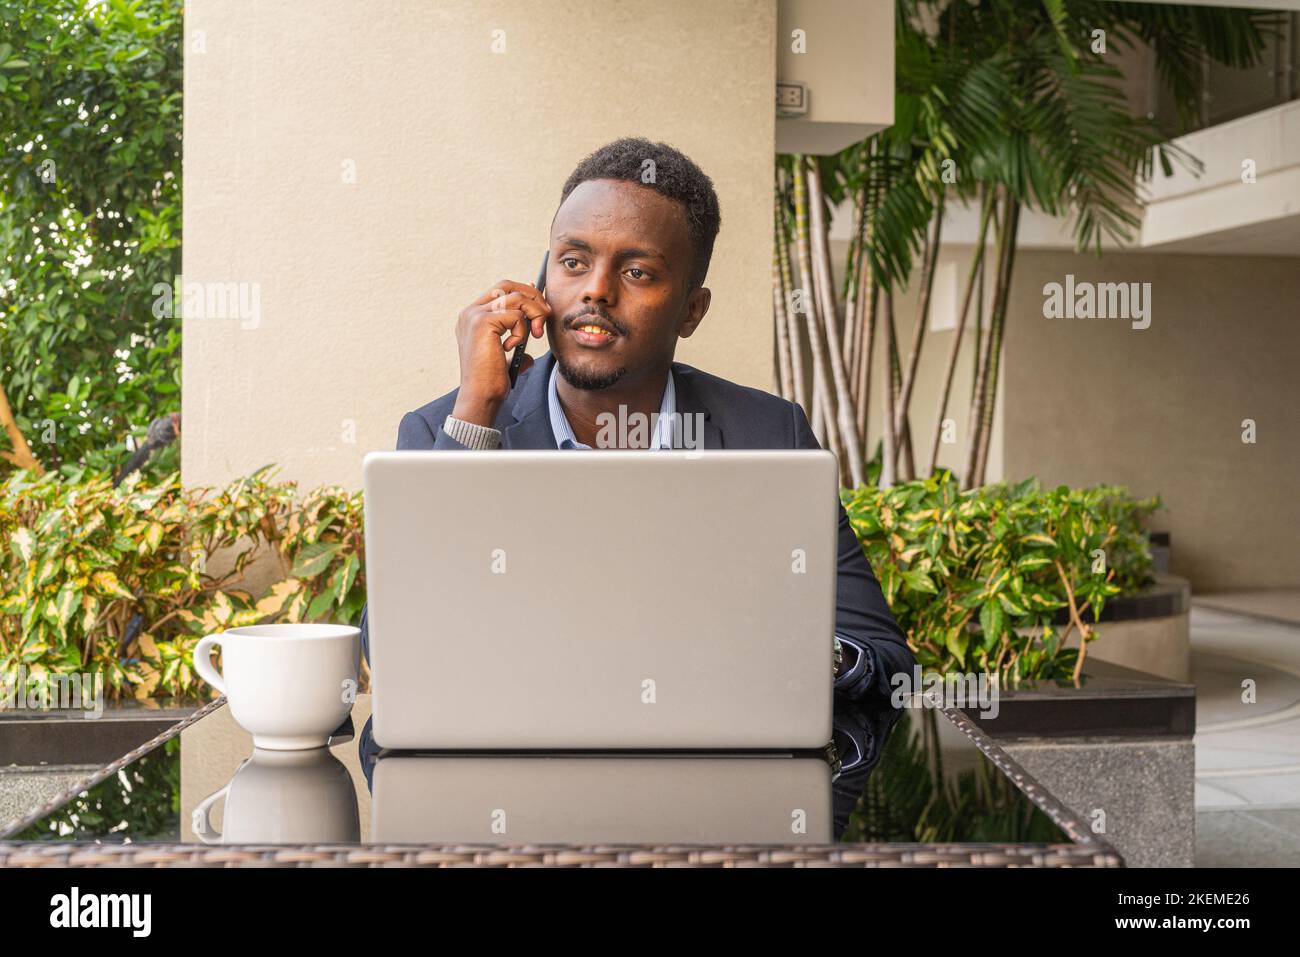 Portrait of handsome black African businessman wearing suit and using laptop computer Stock Photo